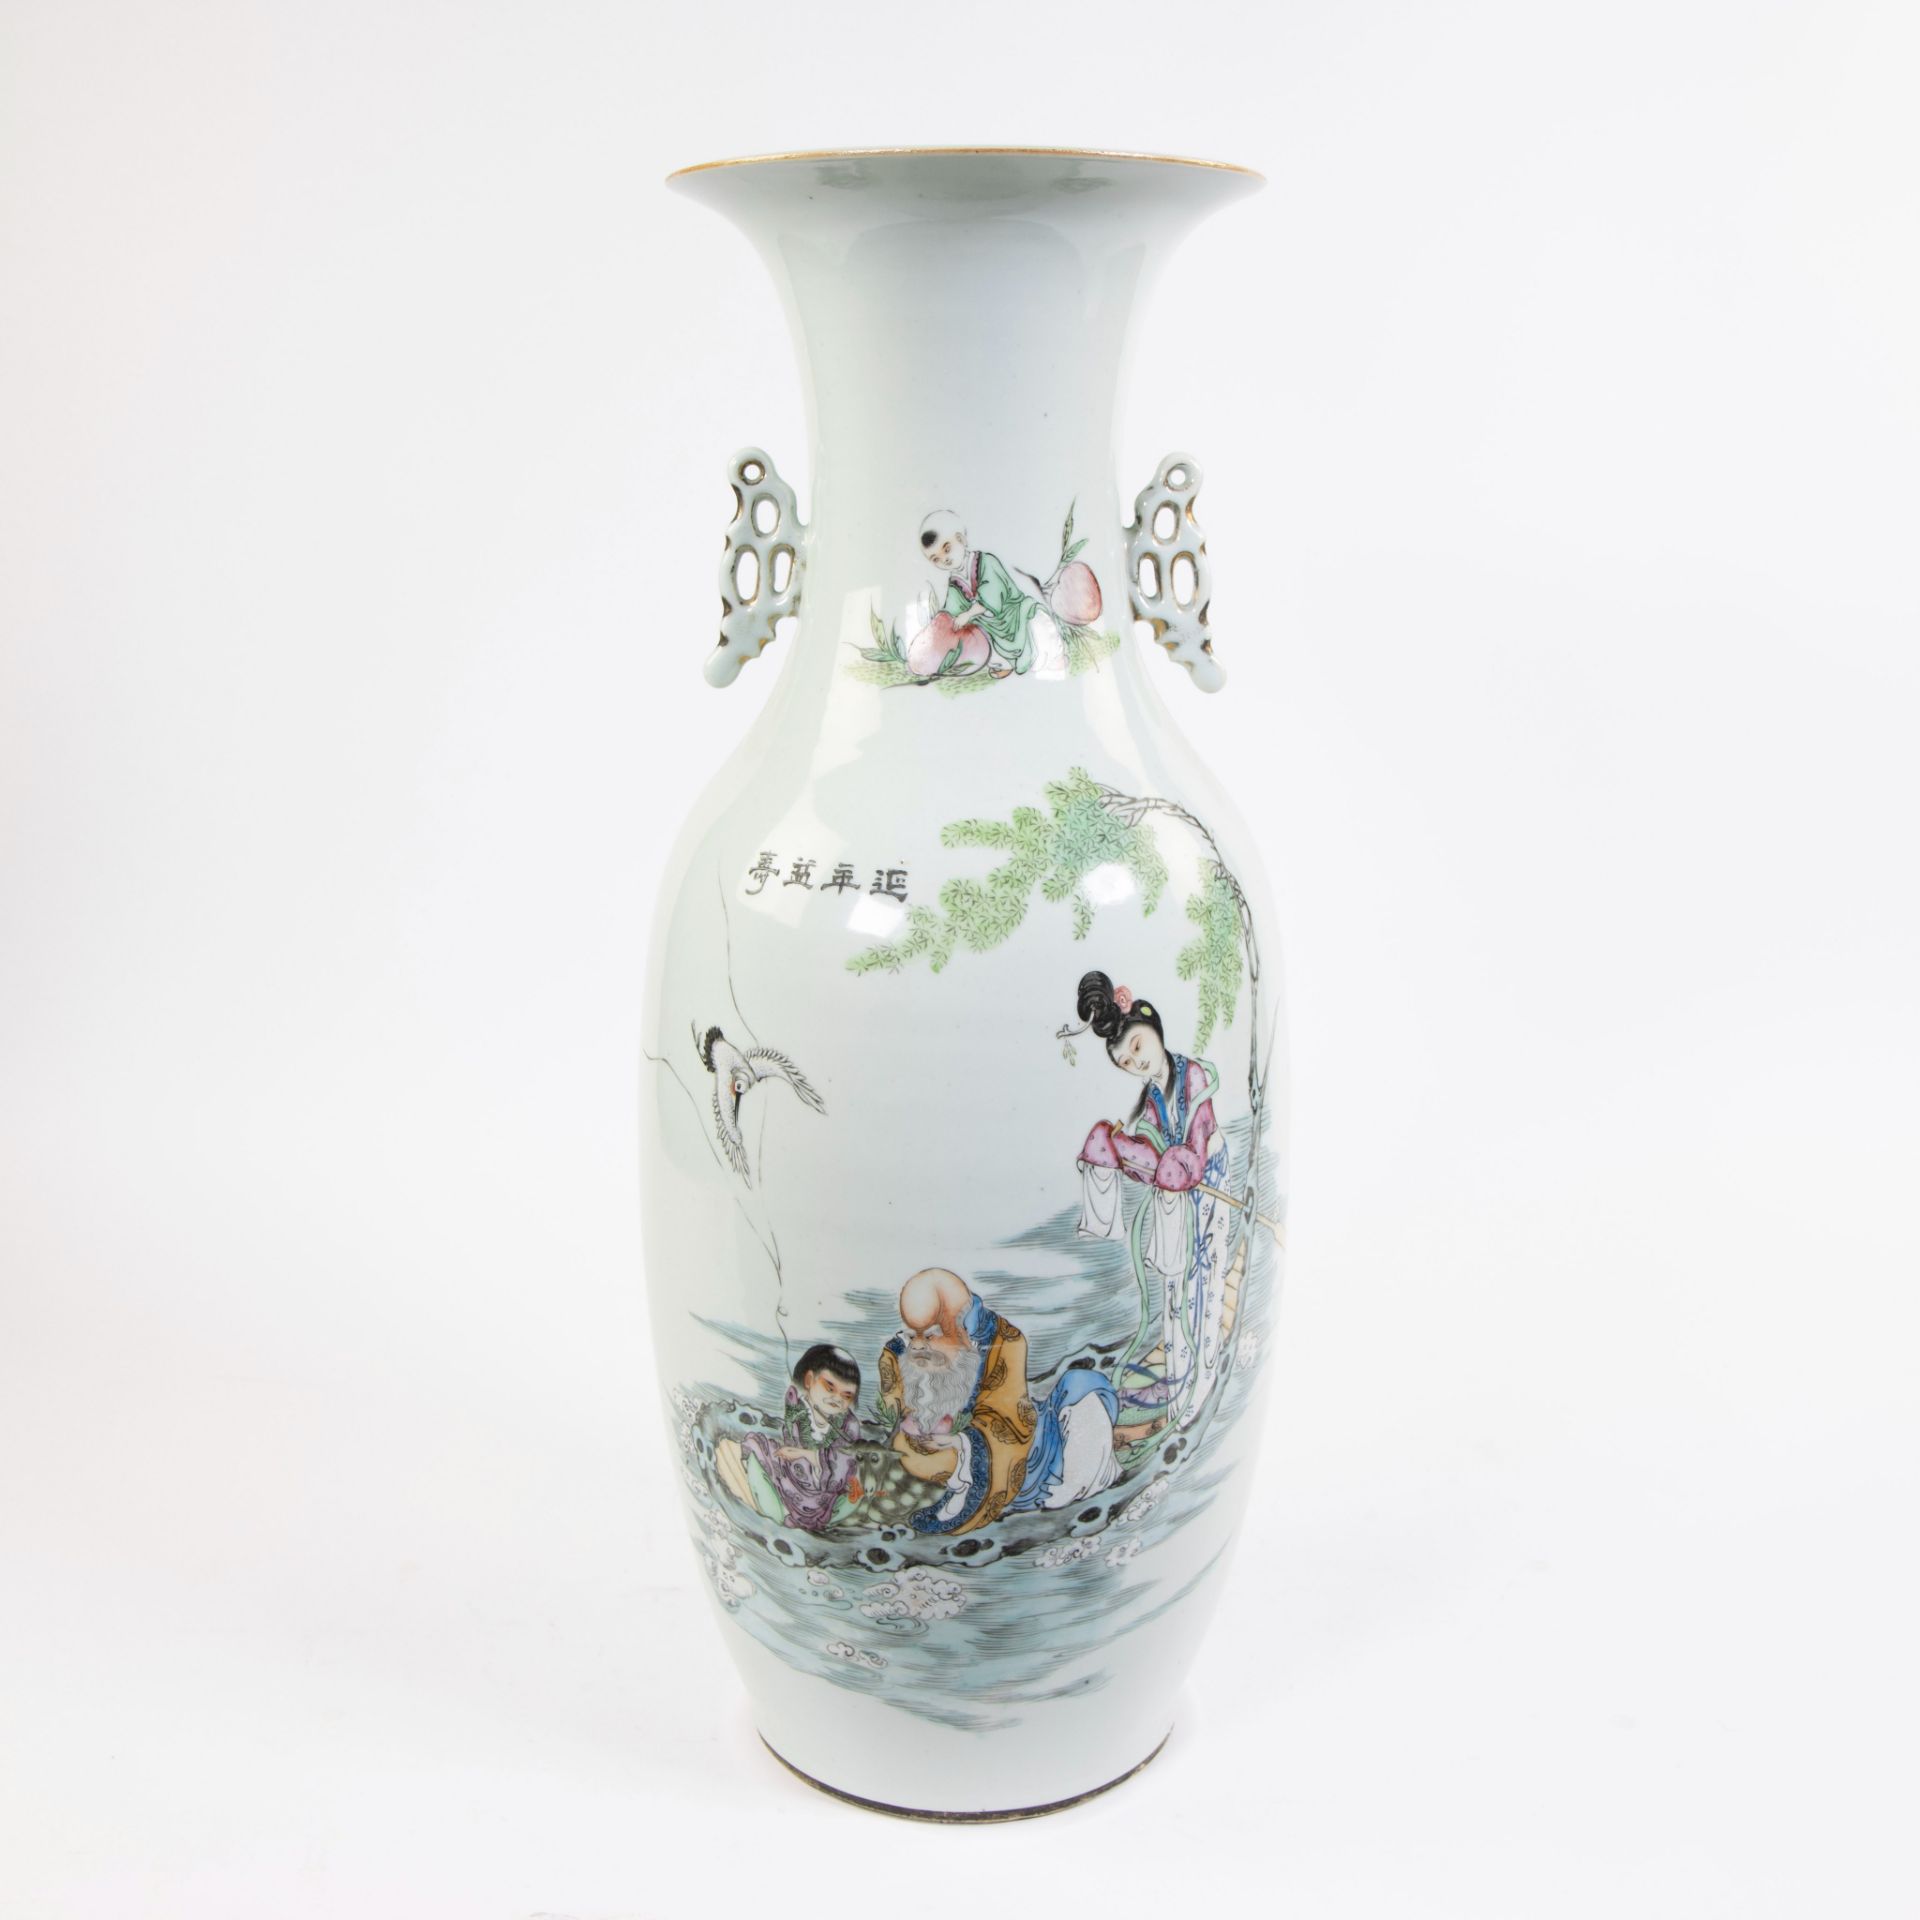 Large baluster vase depicting immortals on a boat made from a livine tree. He Xiangu at the helm, Sh